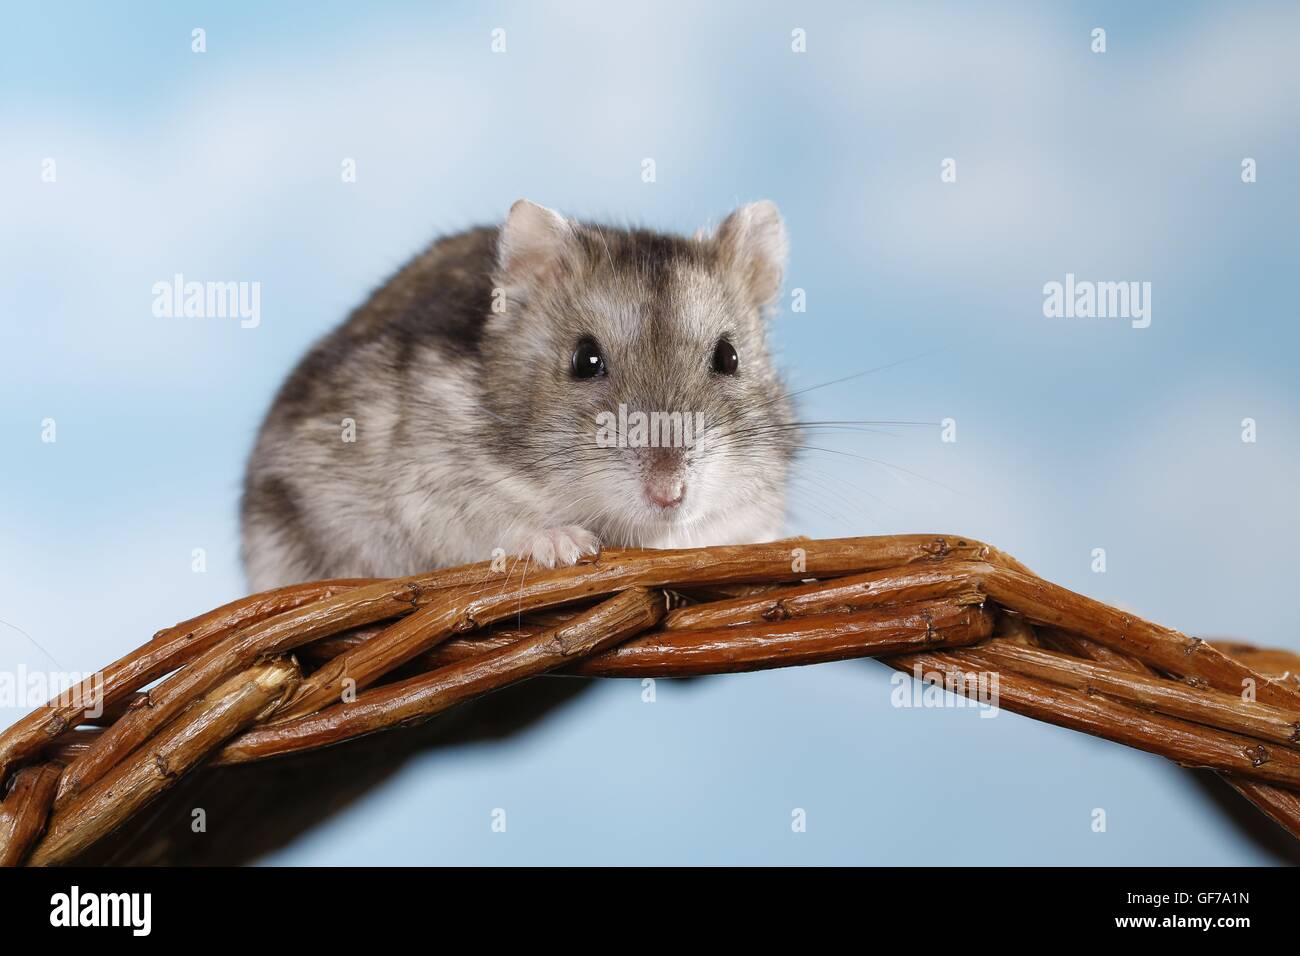 Campbell's dwarf hamster Stock Photo